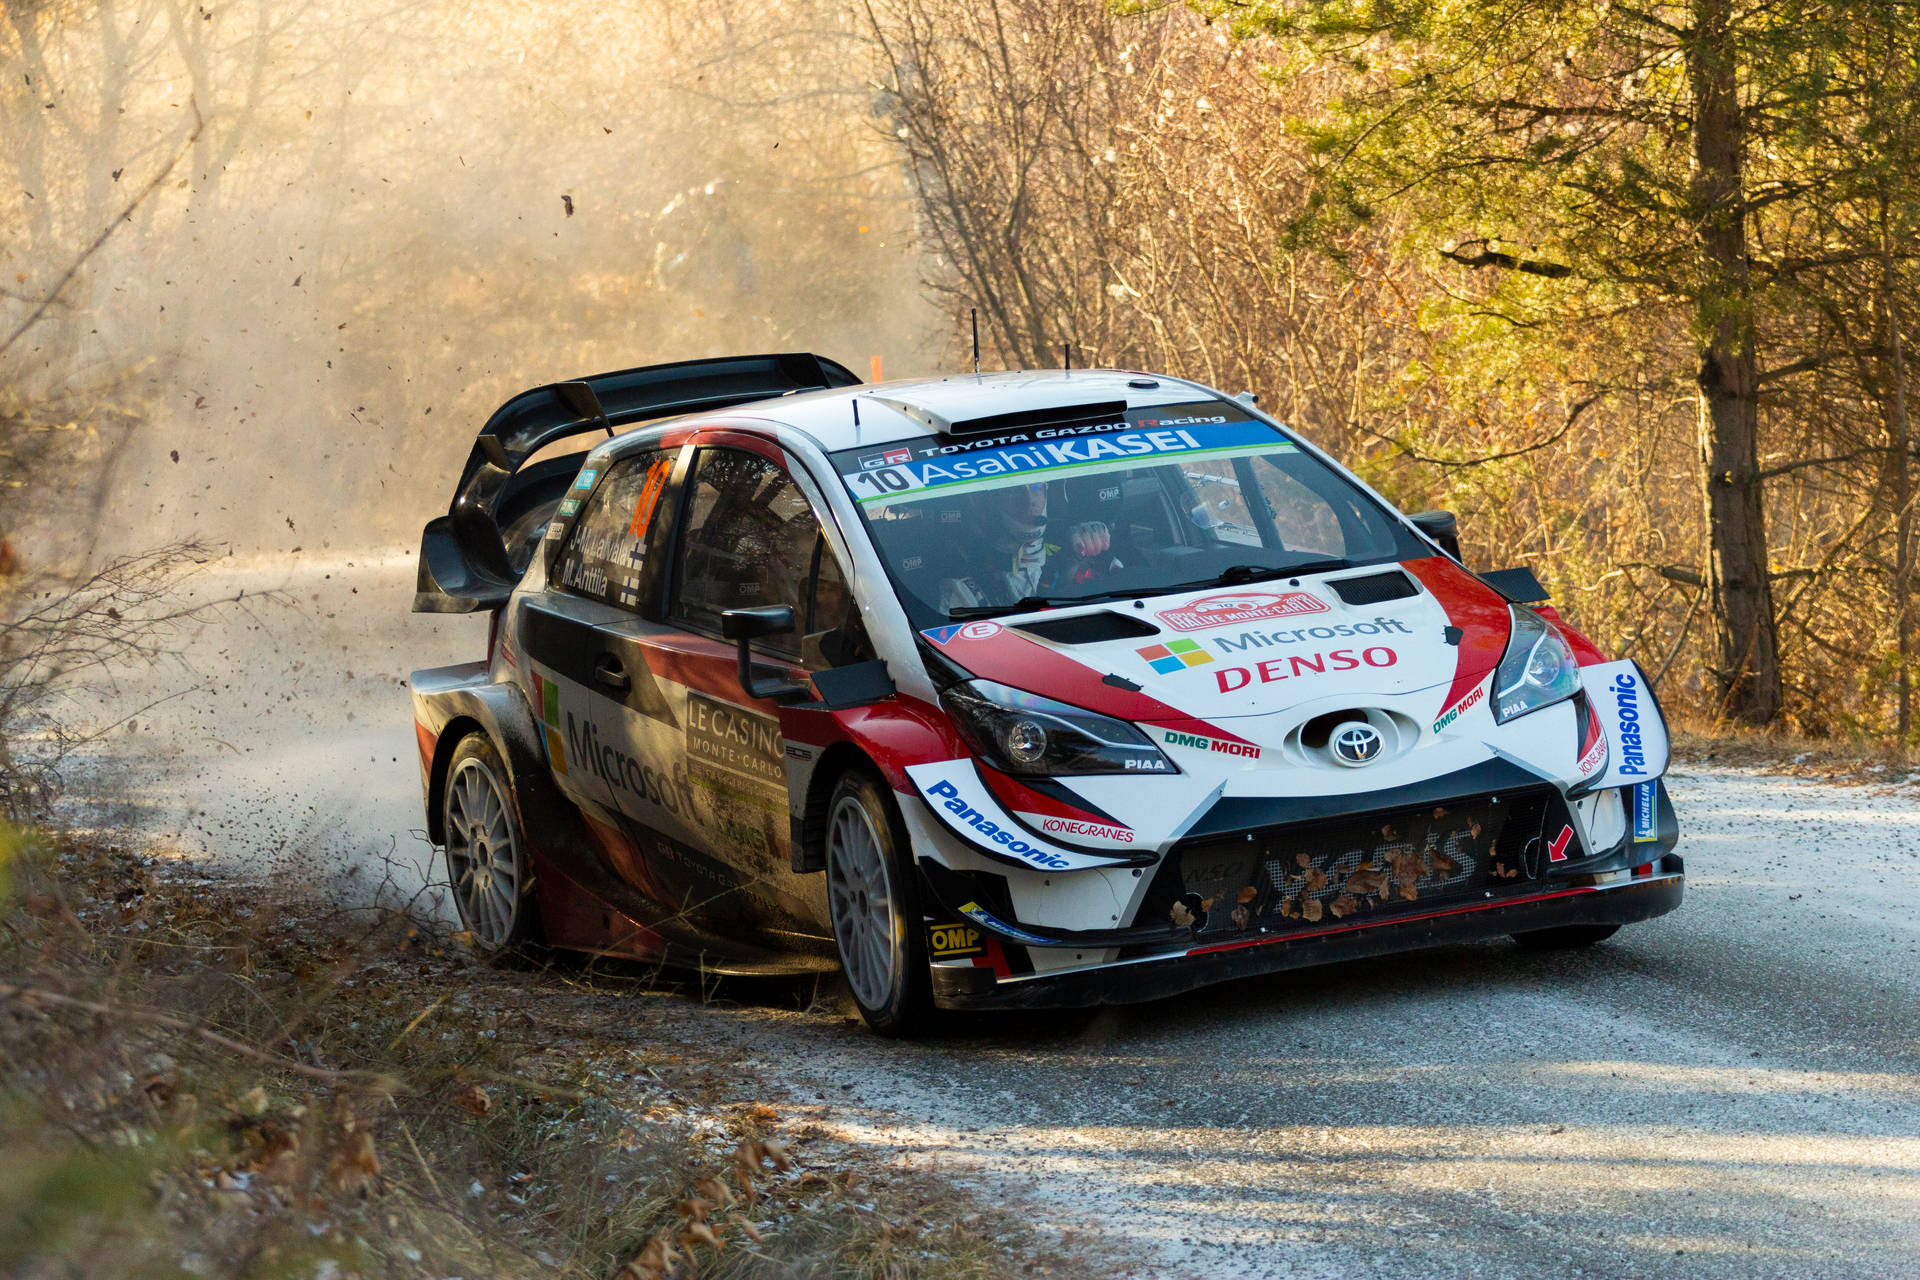 Thrilling Action On Track - Dirt Rally Toyota Yaris